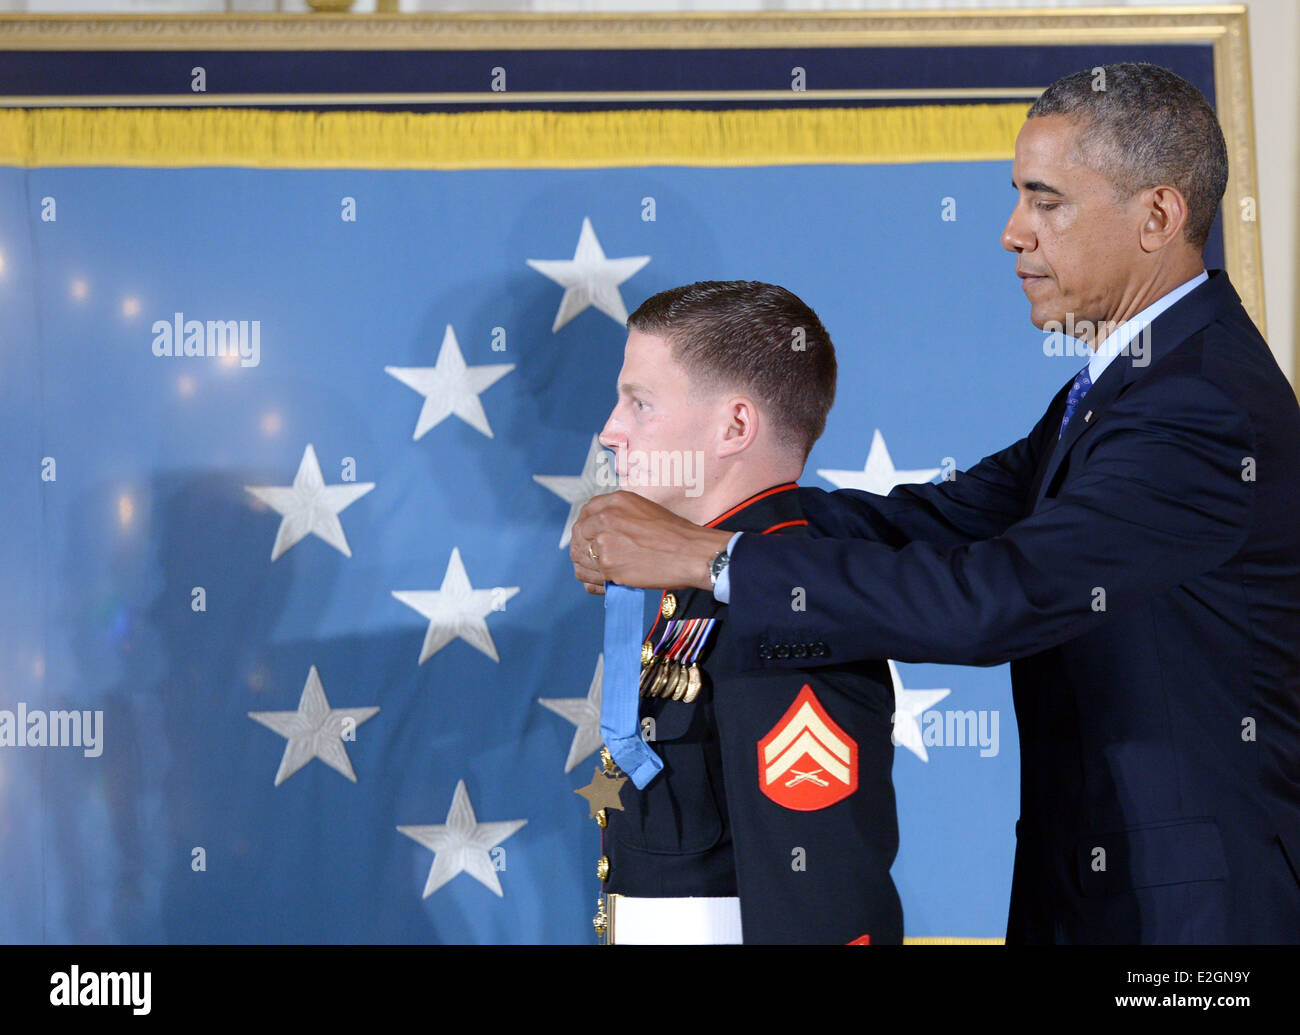 Washington, DC, USA. 19th June, 2014. William 'Kyle' Carpenter (L) receives the Medal of Honor from U.S. President Barack Obama during a ceremony in the East Room of the White House in Washington, DC, the United States, on June 19, 2014. Carpenter received the medal for covering a grenade to save fellow Marines during a Taliban attack in November 2010. Carpenter is the eighth living recipient chosen for the highest military award. Credit:  Yin Bogu/Xinhua/Alamy Live News Stock Photo